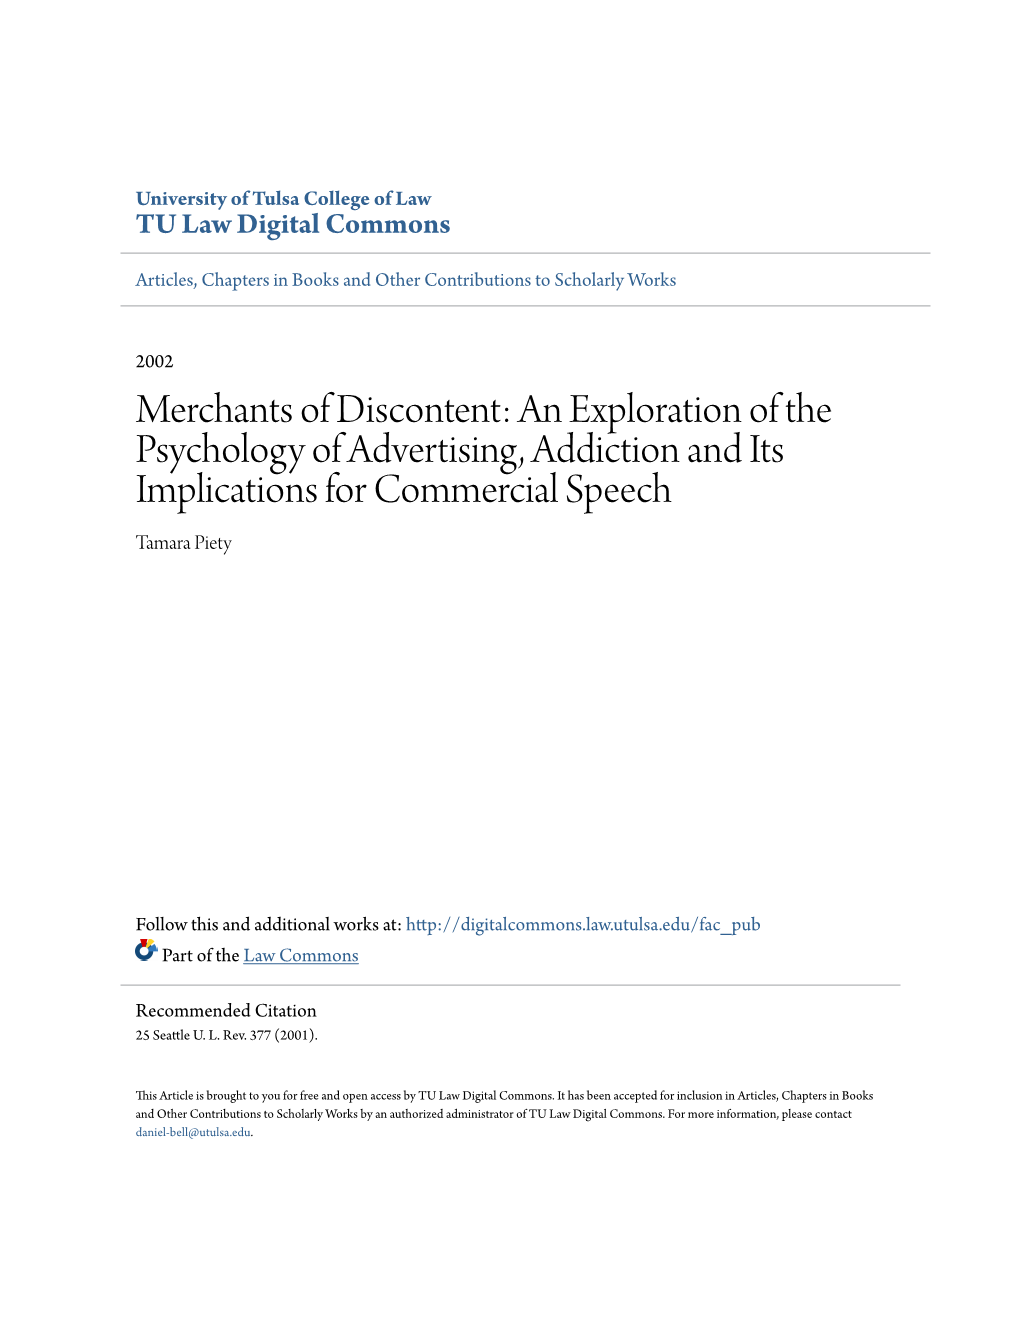 Merchants of Discontent: an Exploration of the Psychology of Advertising, Addiction and Its Implications for Commercial Speech Tamara Piety